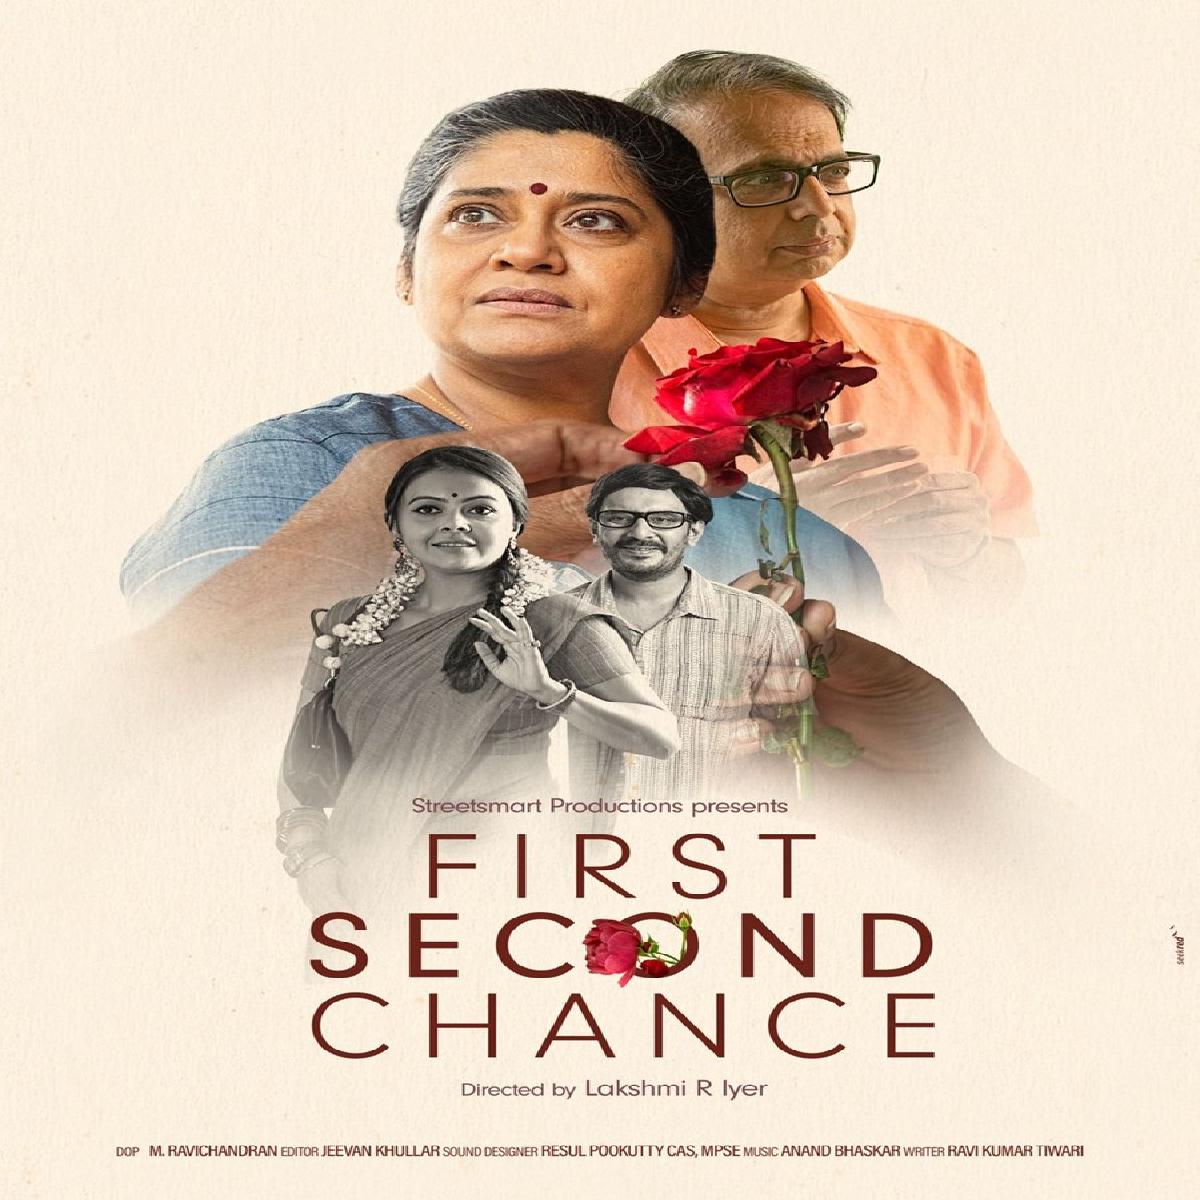 Renuka Shahane And Ananth Mahadevan In First Second Chance